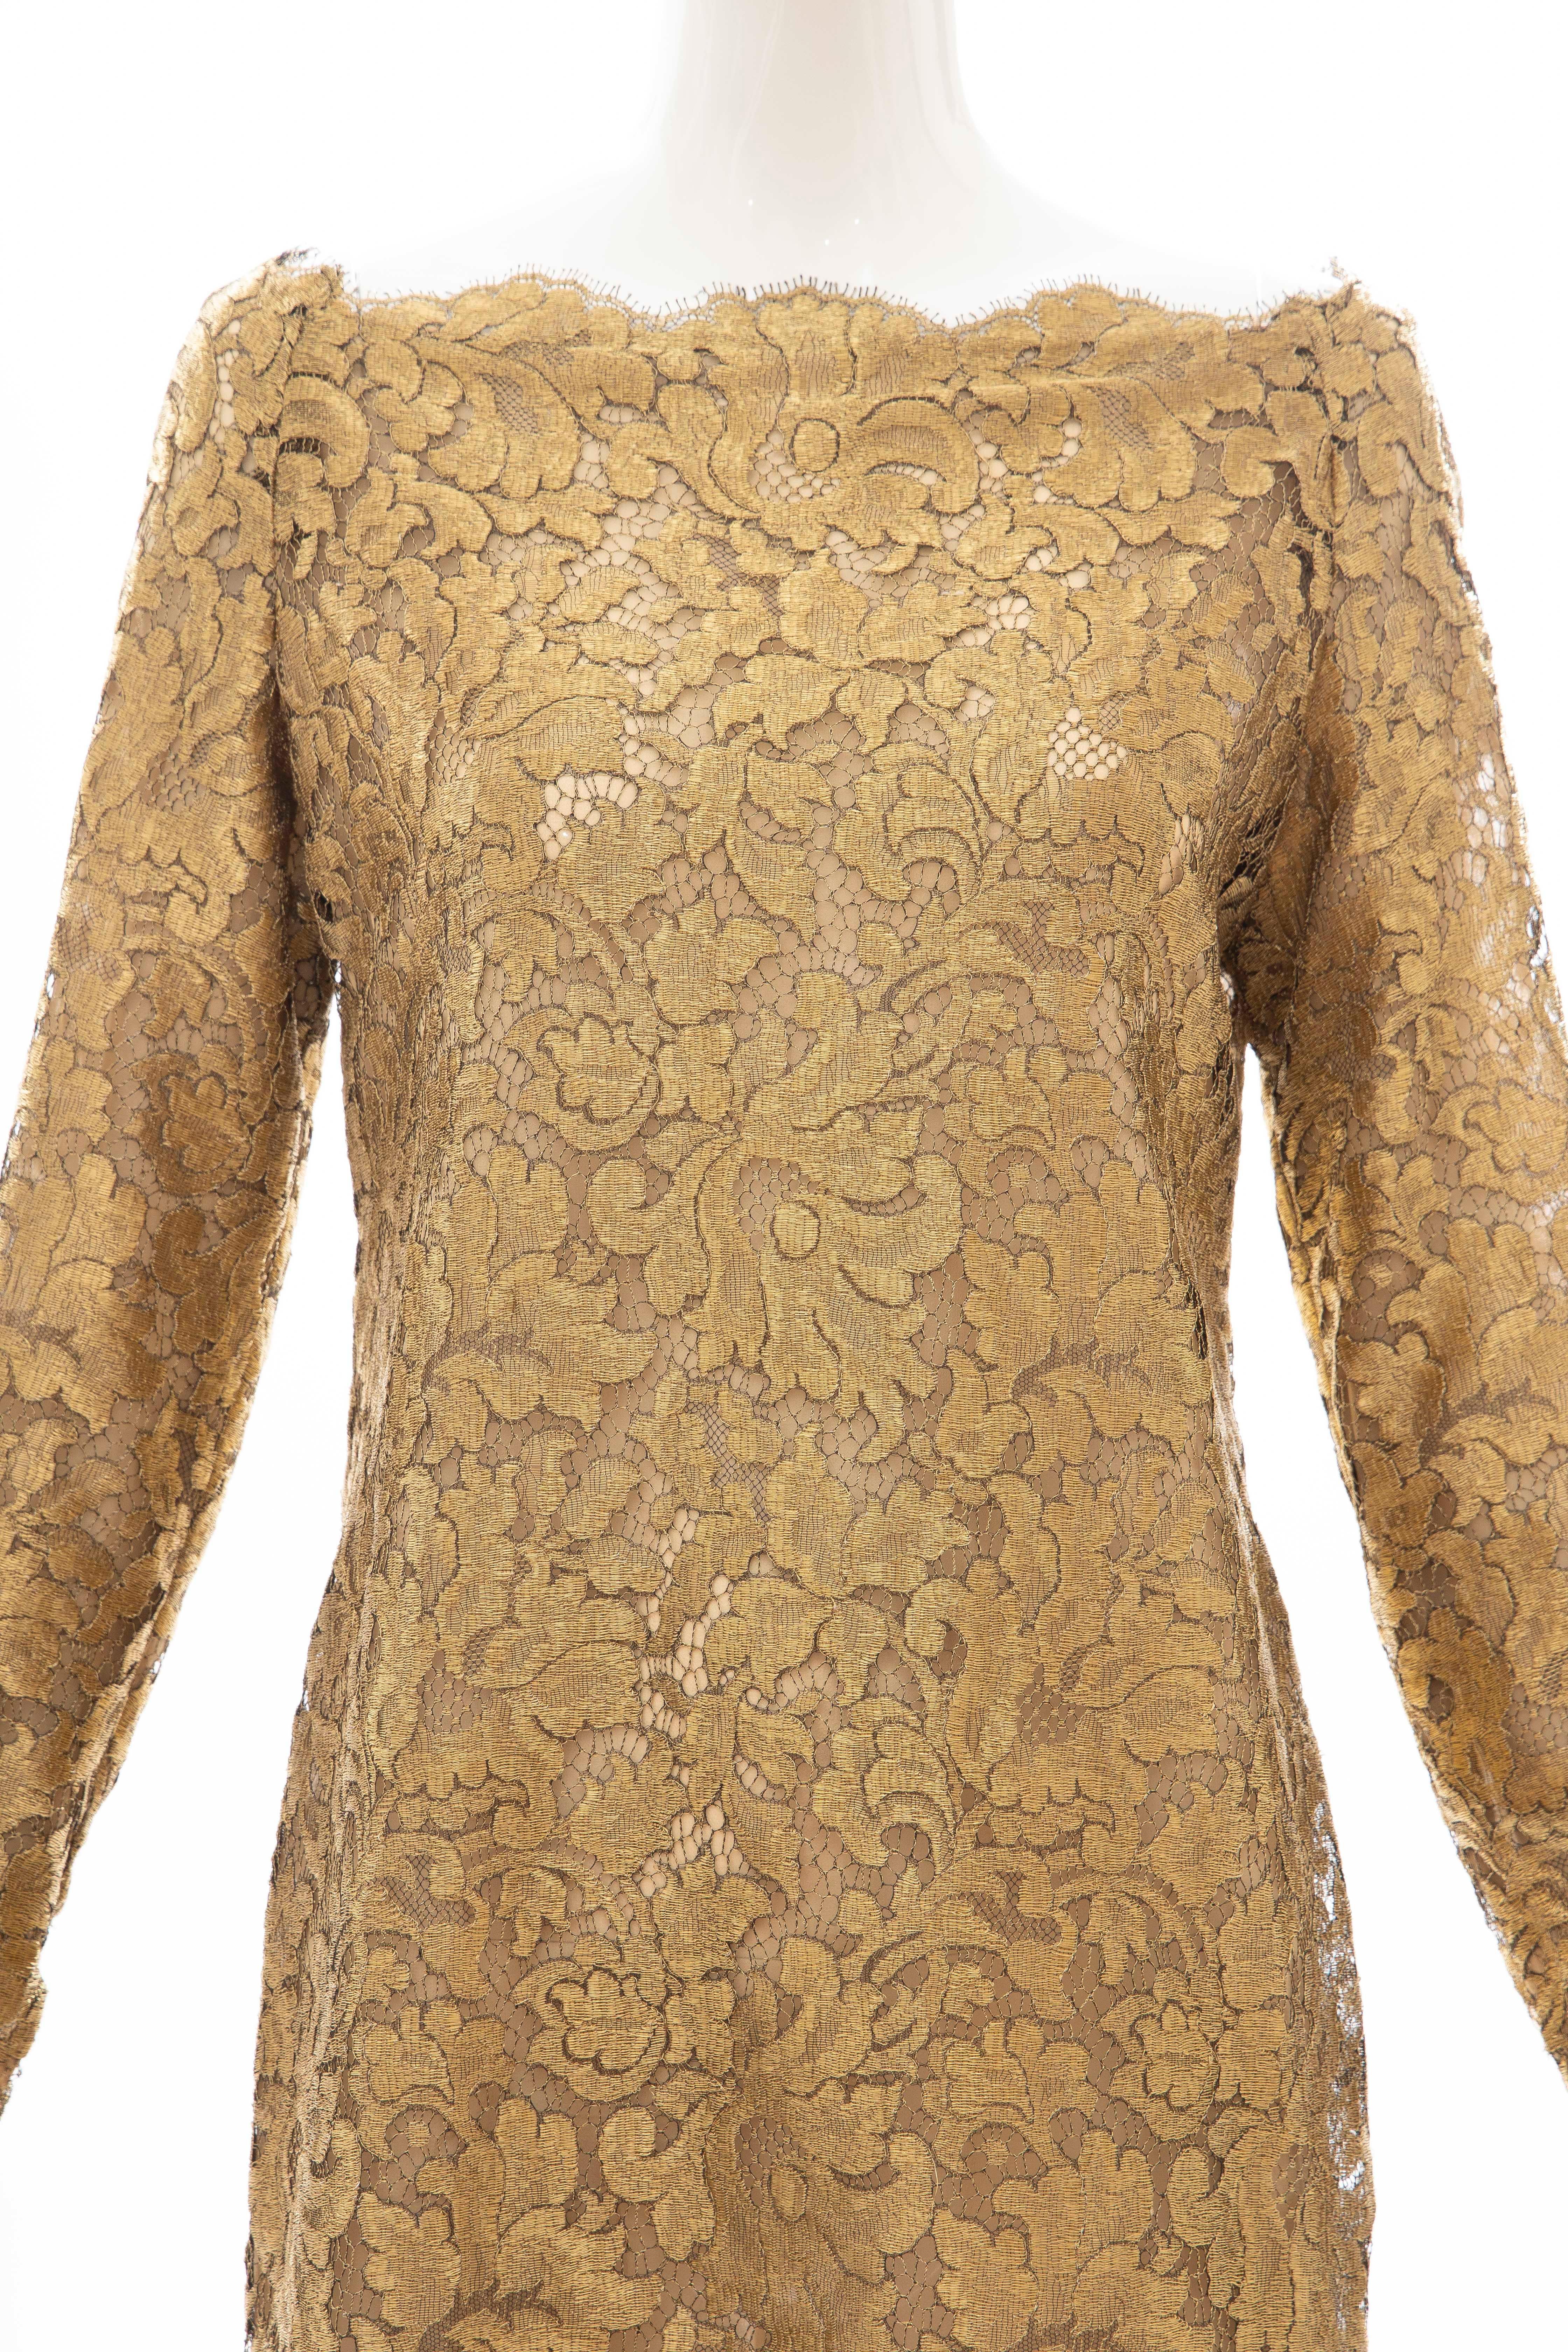 Calvin Klein Collection, Fall 1991, metallic gold metal lace evening dress with concealed back zip and fully lined.

US. 10

Bust: 35, Waist: 33, Hip: 37, Sleeve: 24. Length: 33 